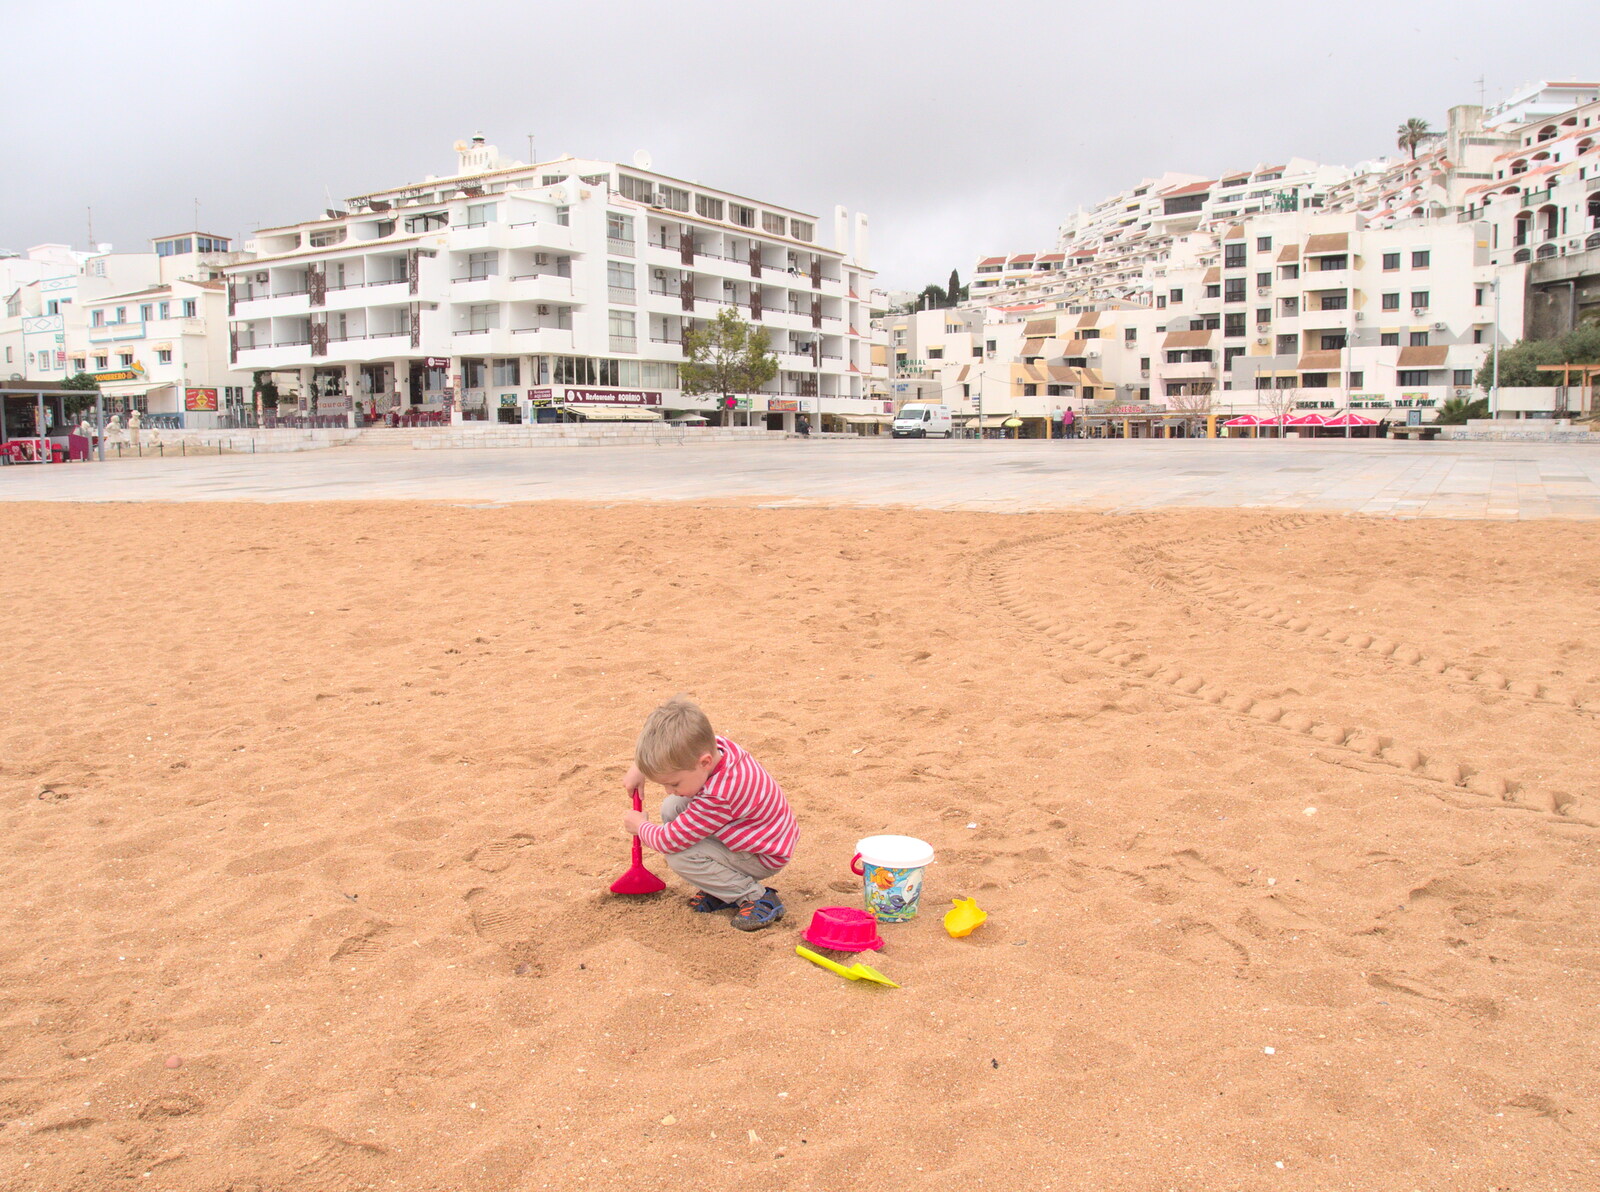 Harry digs away in the sand from A Trip to Albufeira: The Hotel Paraiso, Portugal - 3rd April 2016